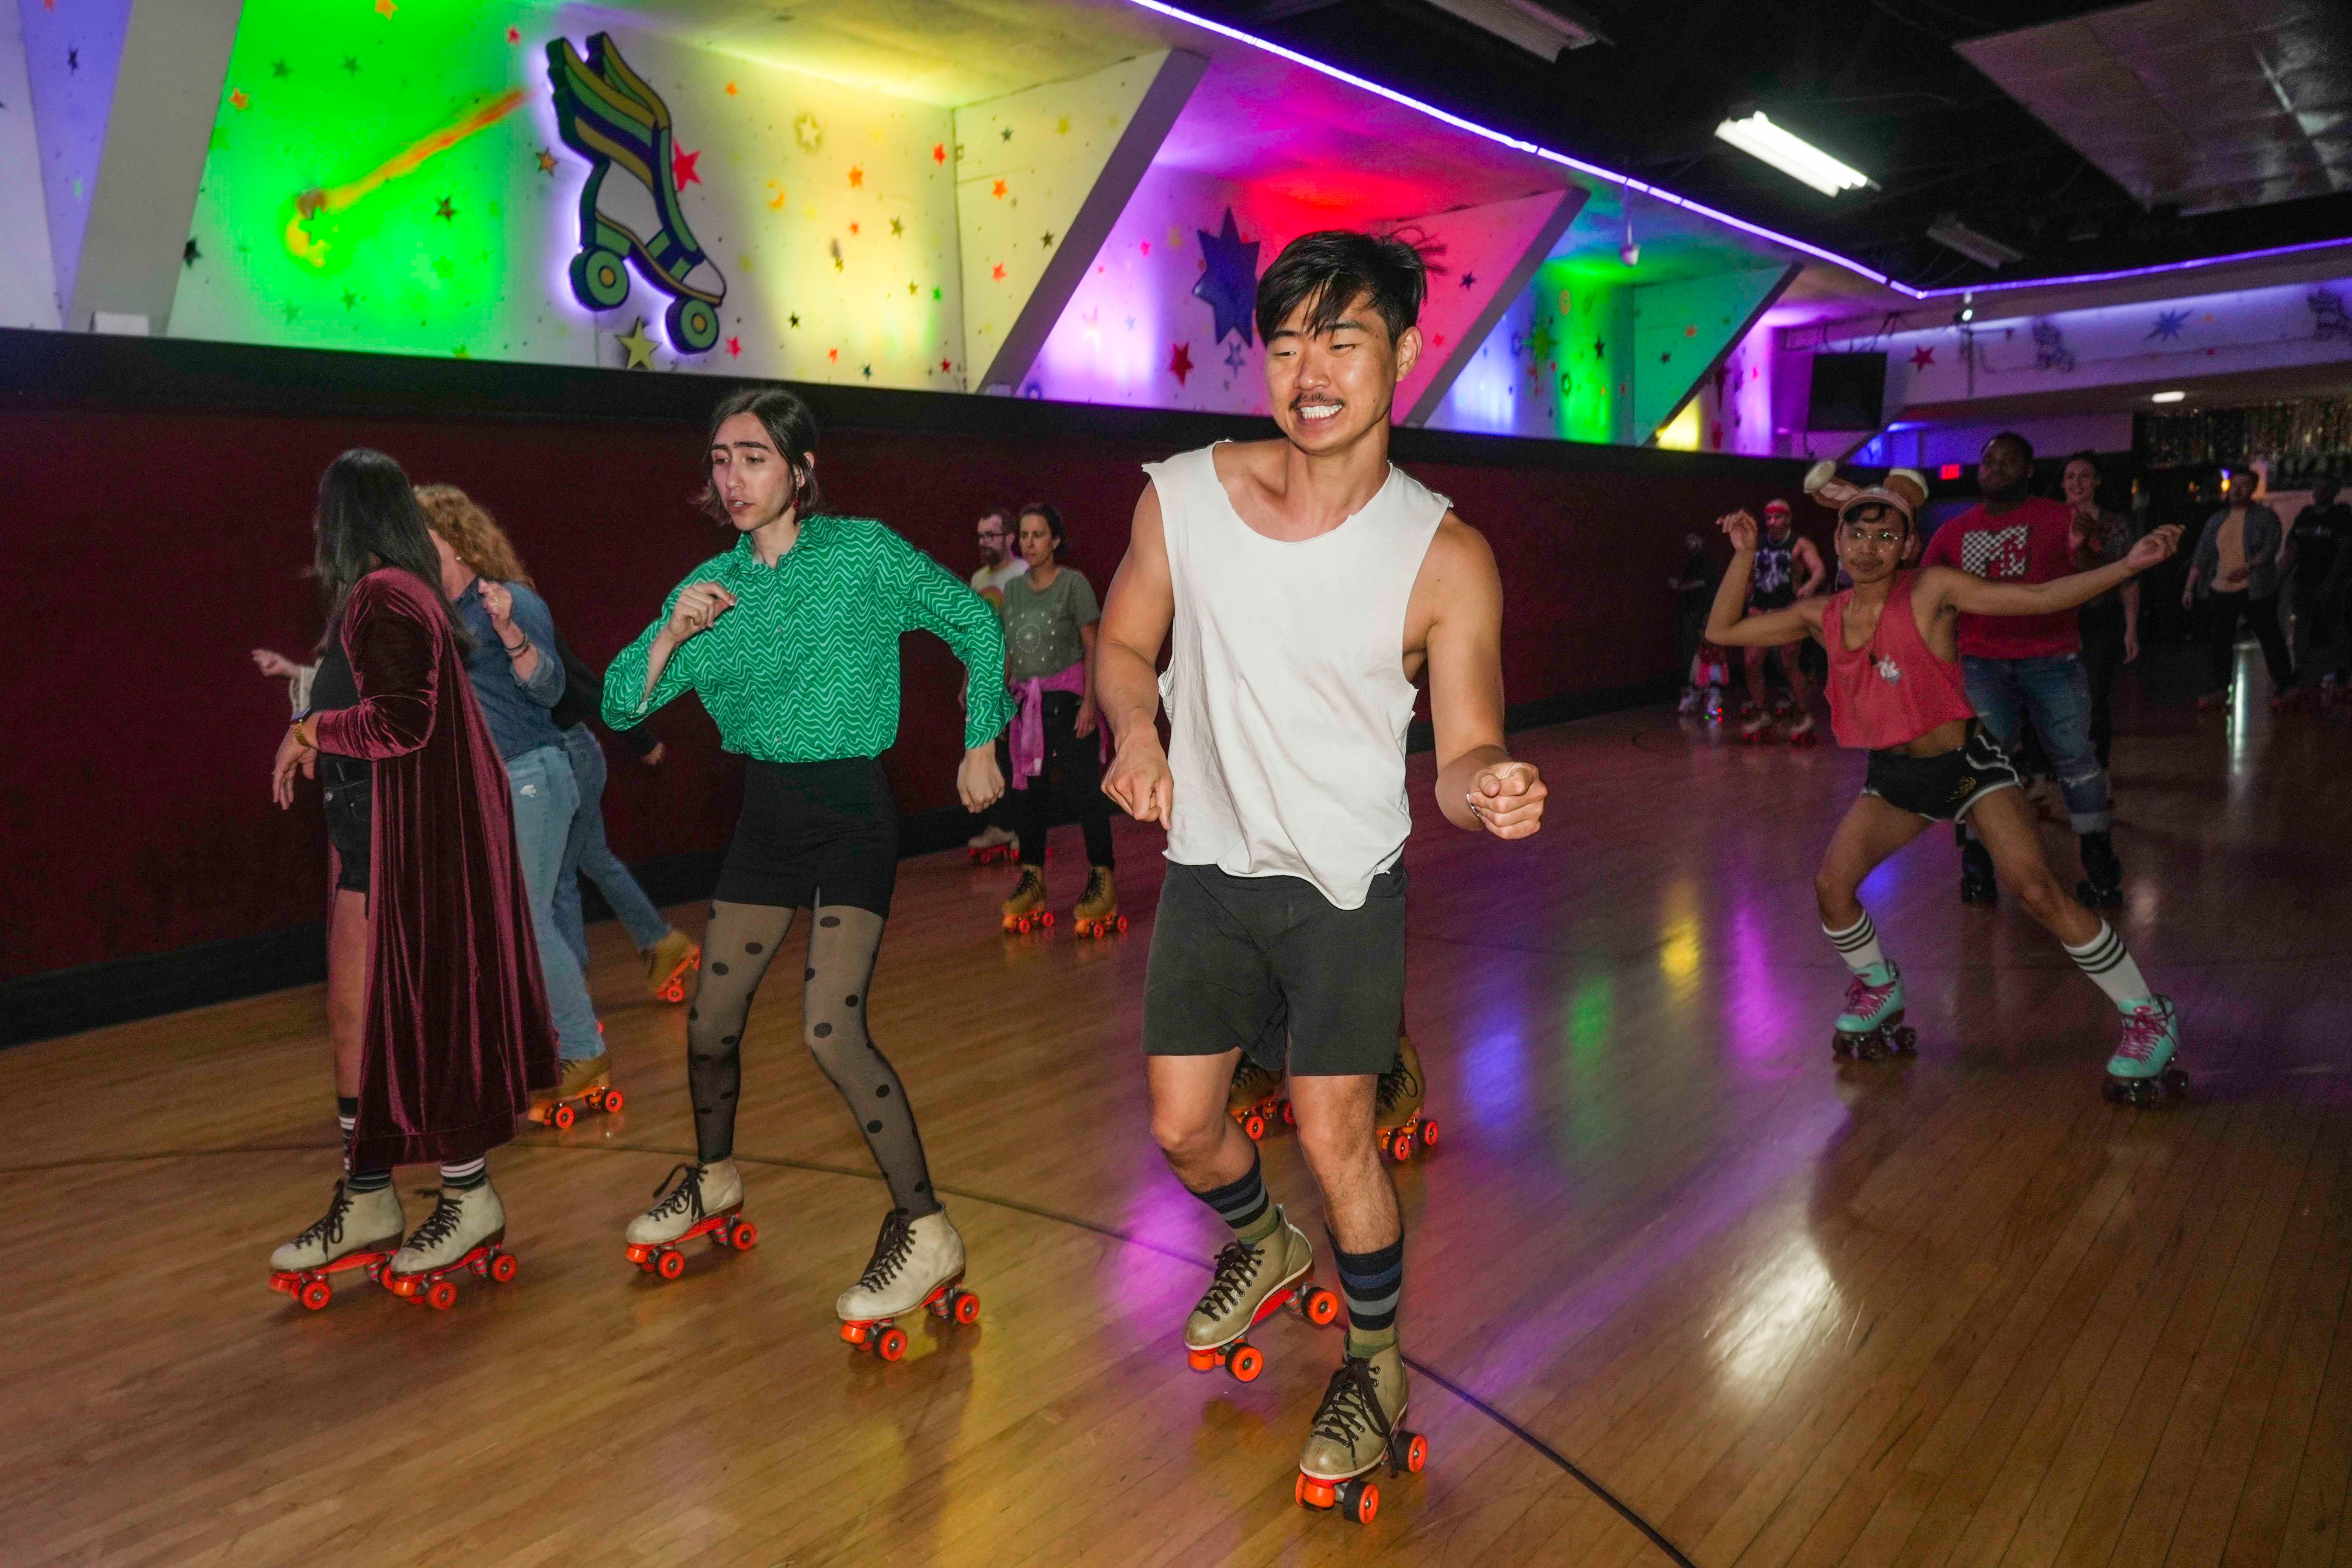 Skaters dance and skate at Rainbow Skate Night hosted by Moonlight Rollerway in Glendale, Calif. Rainbow Skate Night is the longest LGBTQ+-friendly skating event in Los Angeles County.